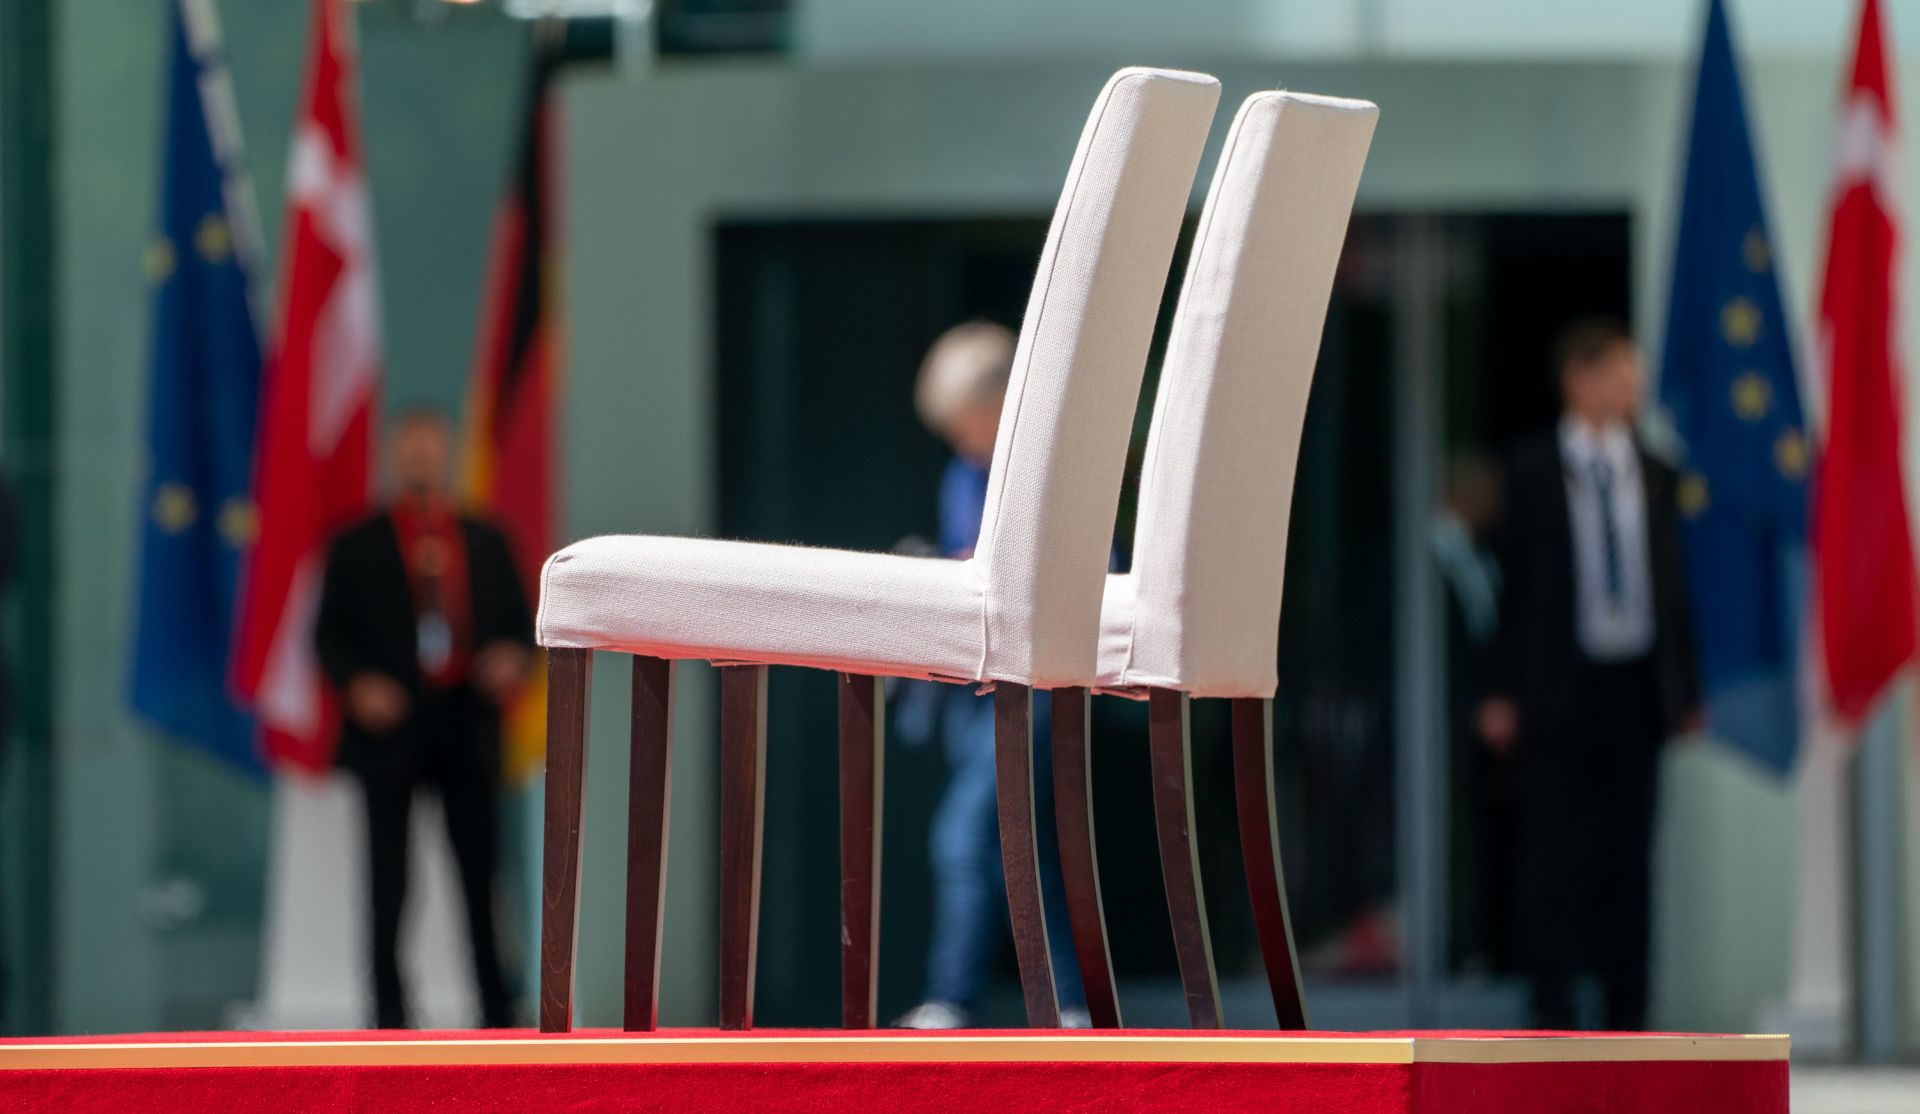 11 July 2019, Berlin: Two chairs are seen on the pedestal at the yard of the German Chancellery, before German Chancellor Angela Merkel receives Danish Prime Minister Mette Frederiksen during a ceremonial welcome. Photo: Michael Kappeler/dpa